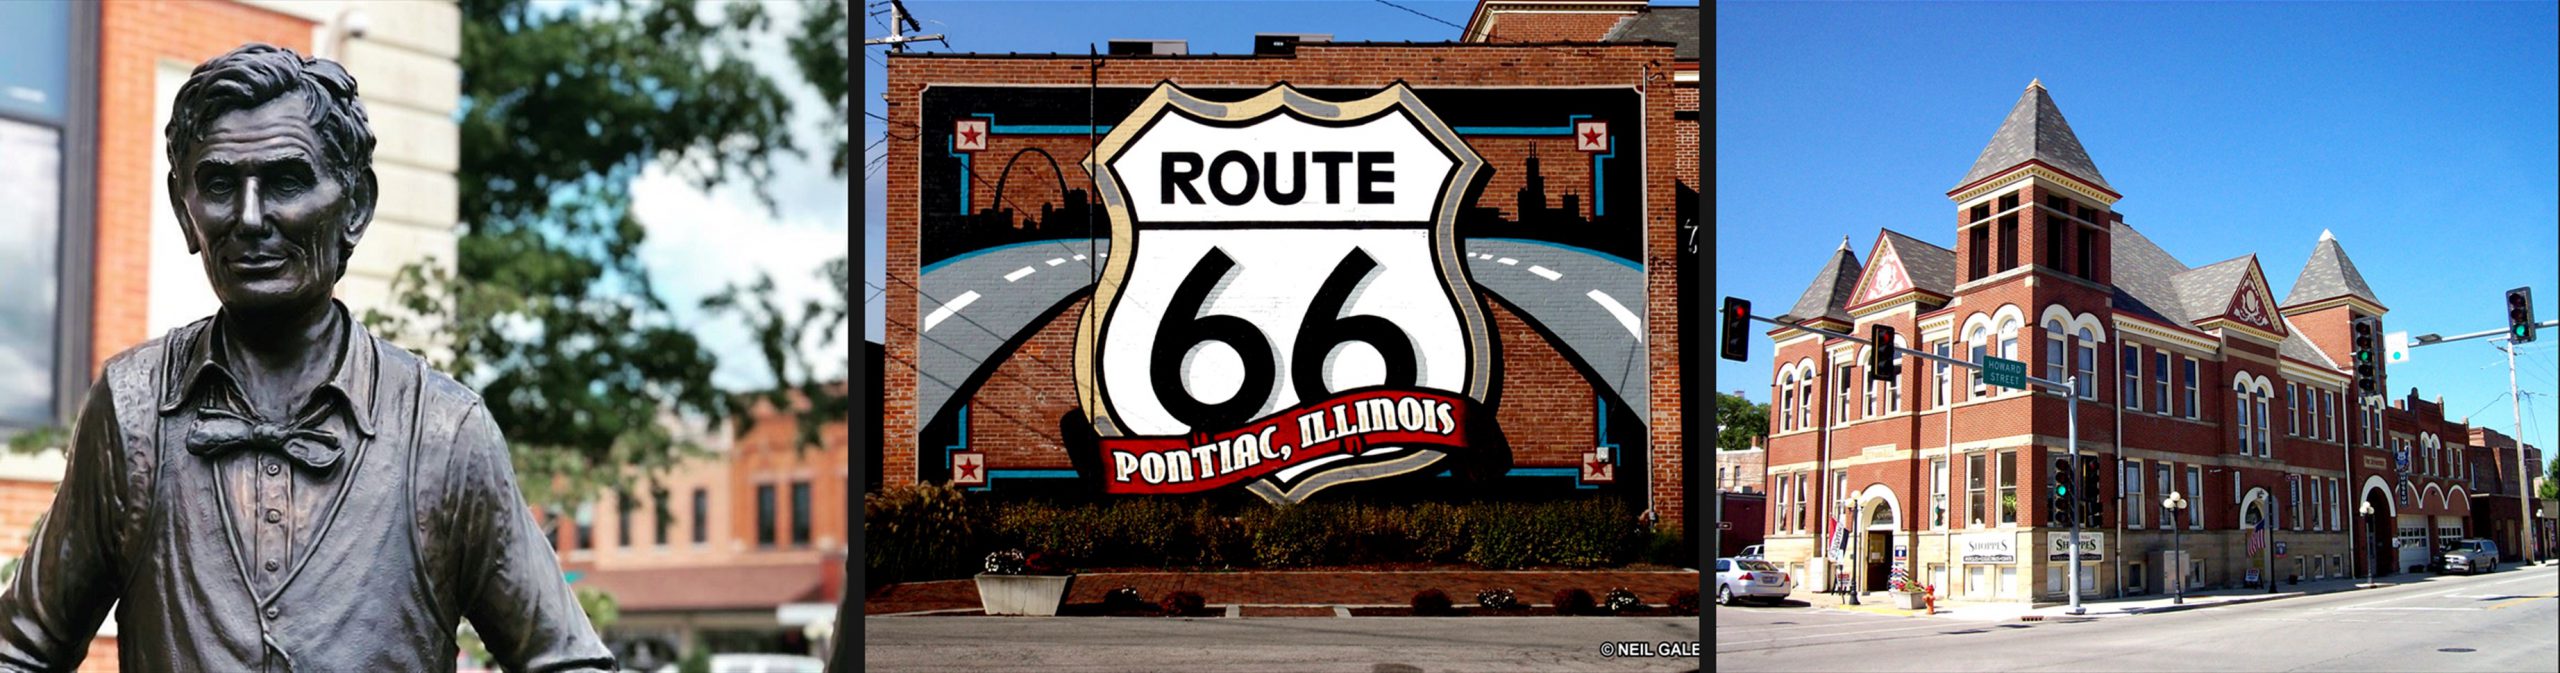 Pontiac Illinois Attractions: Abraham Lincoln Statue, Route 66 Mural, Historic Route 66 Museum